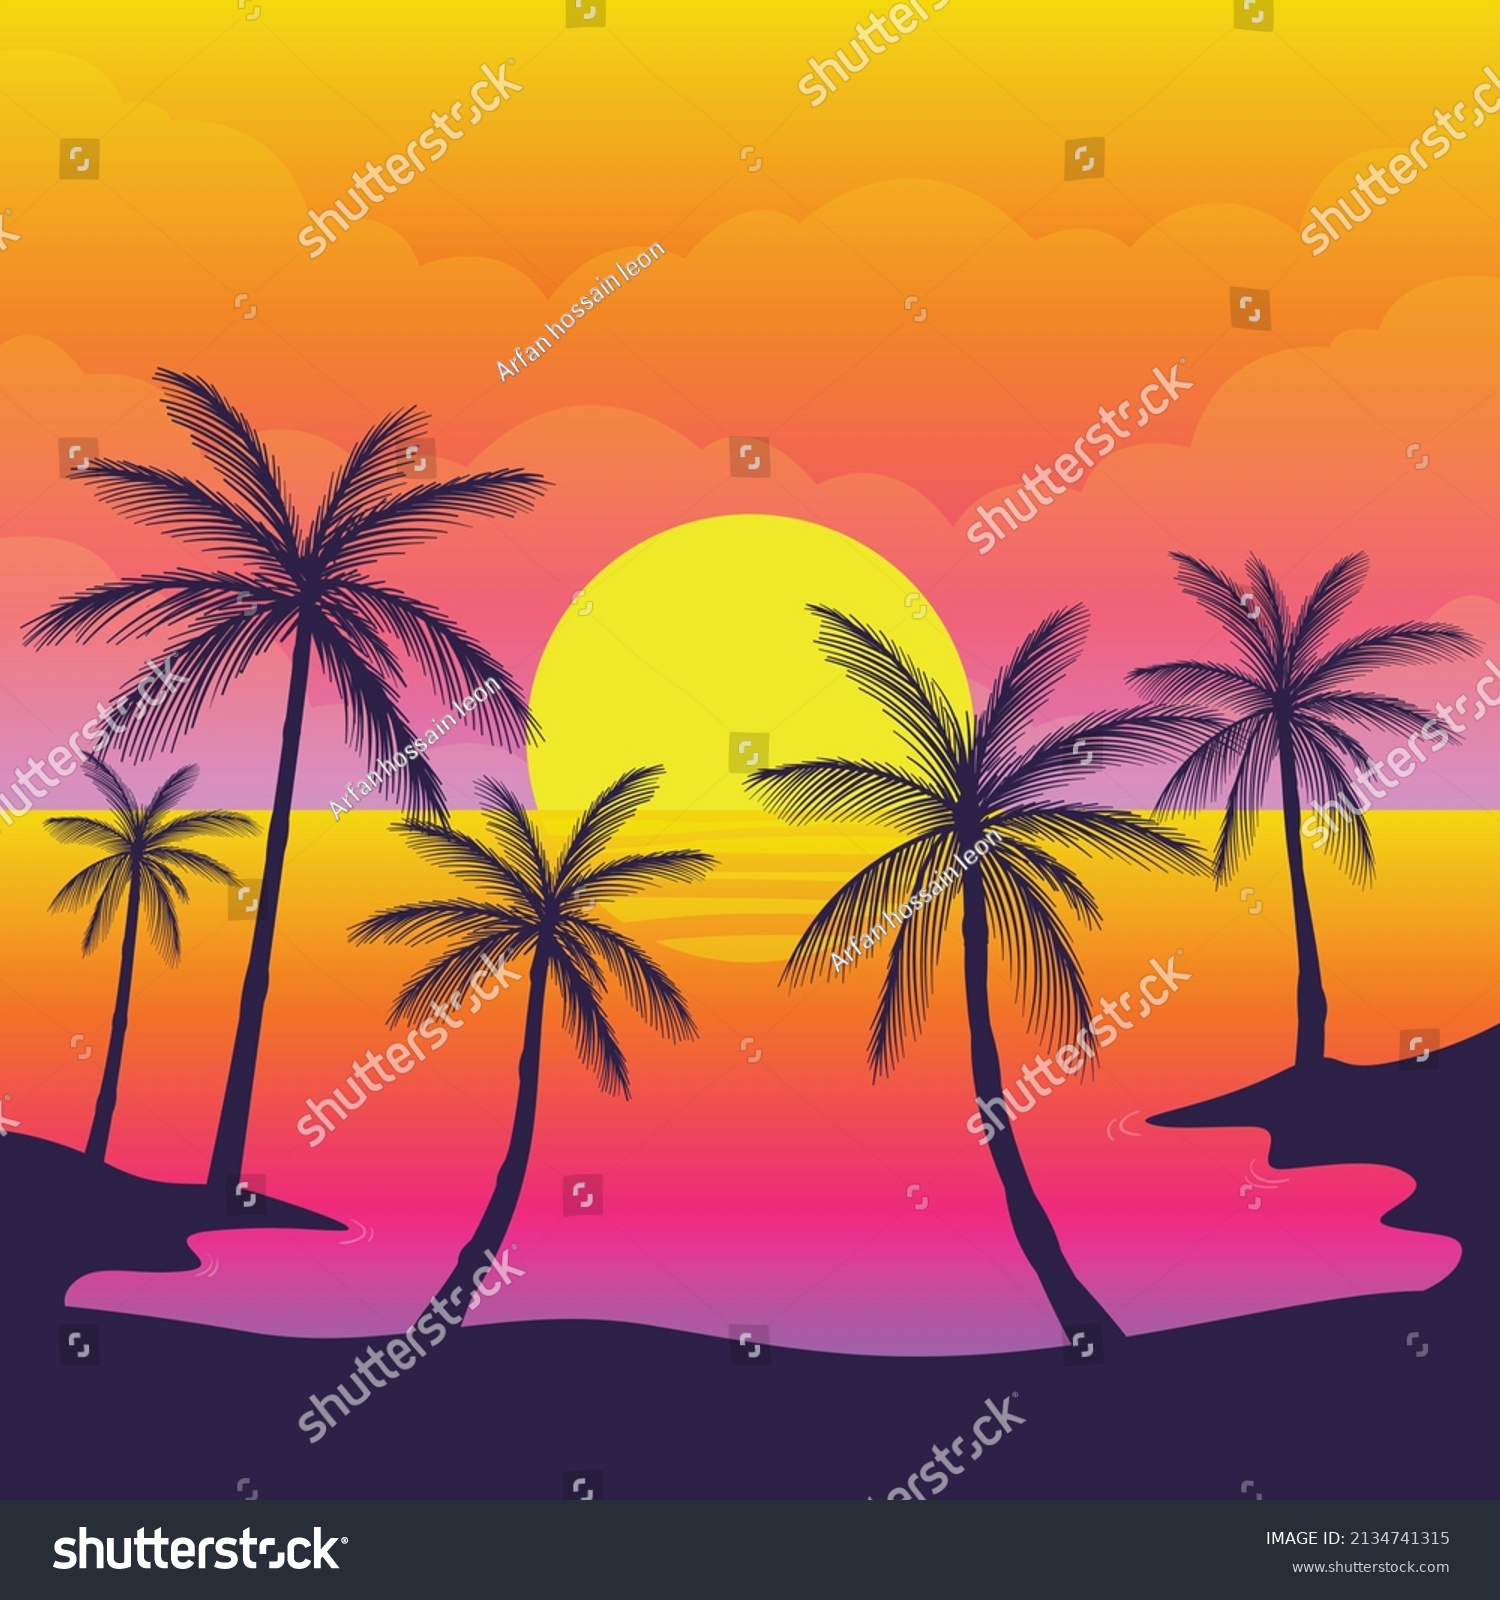 Beach Sunset Palm Tree Silhouette Landscape Stock Vector (Royalty Free ...